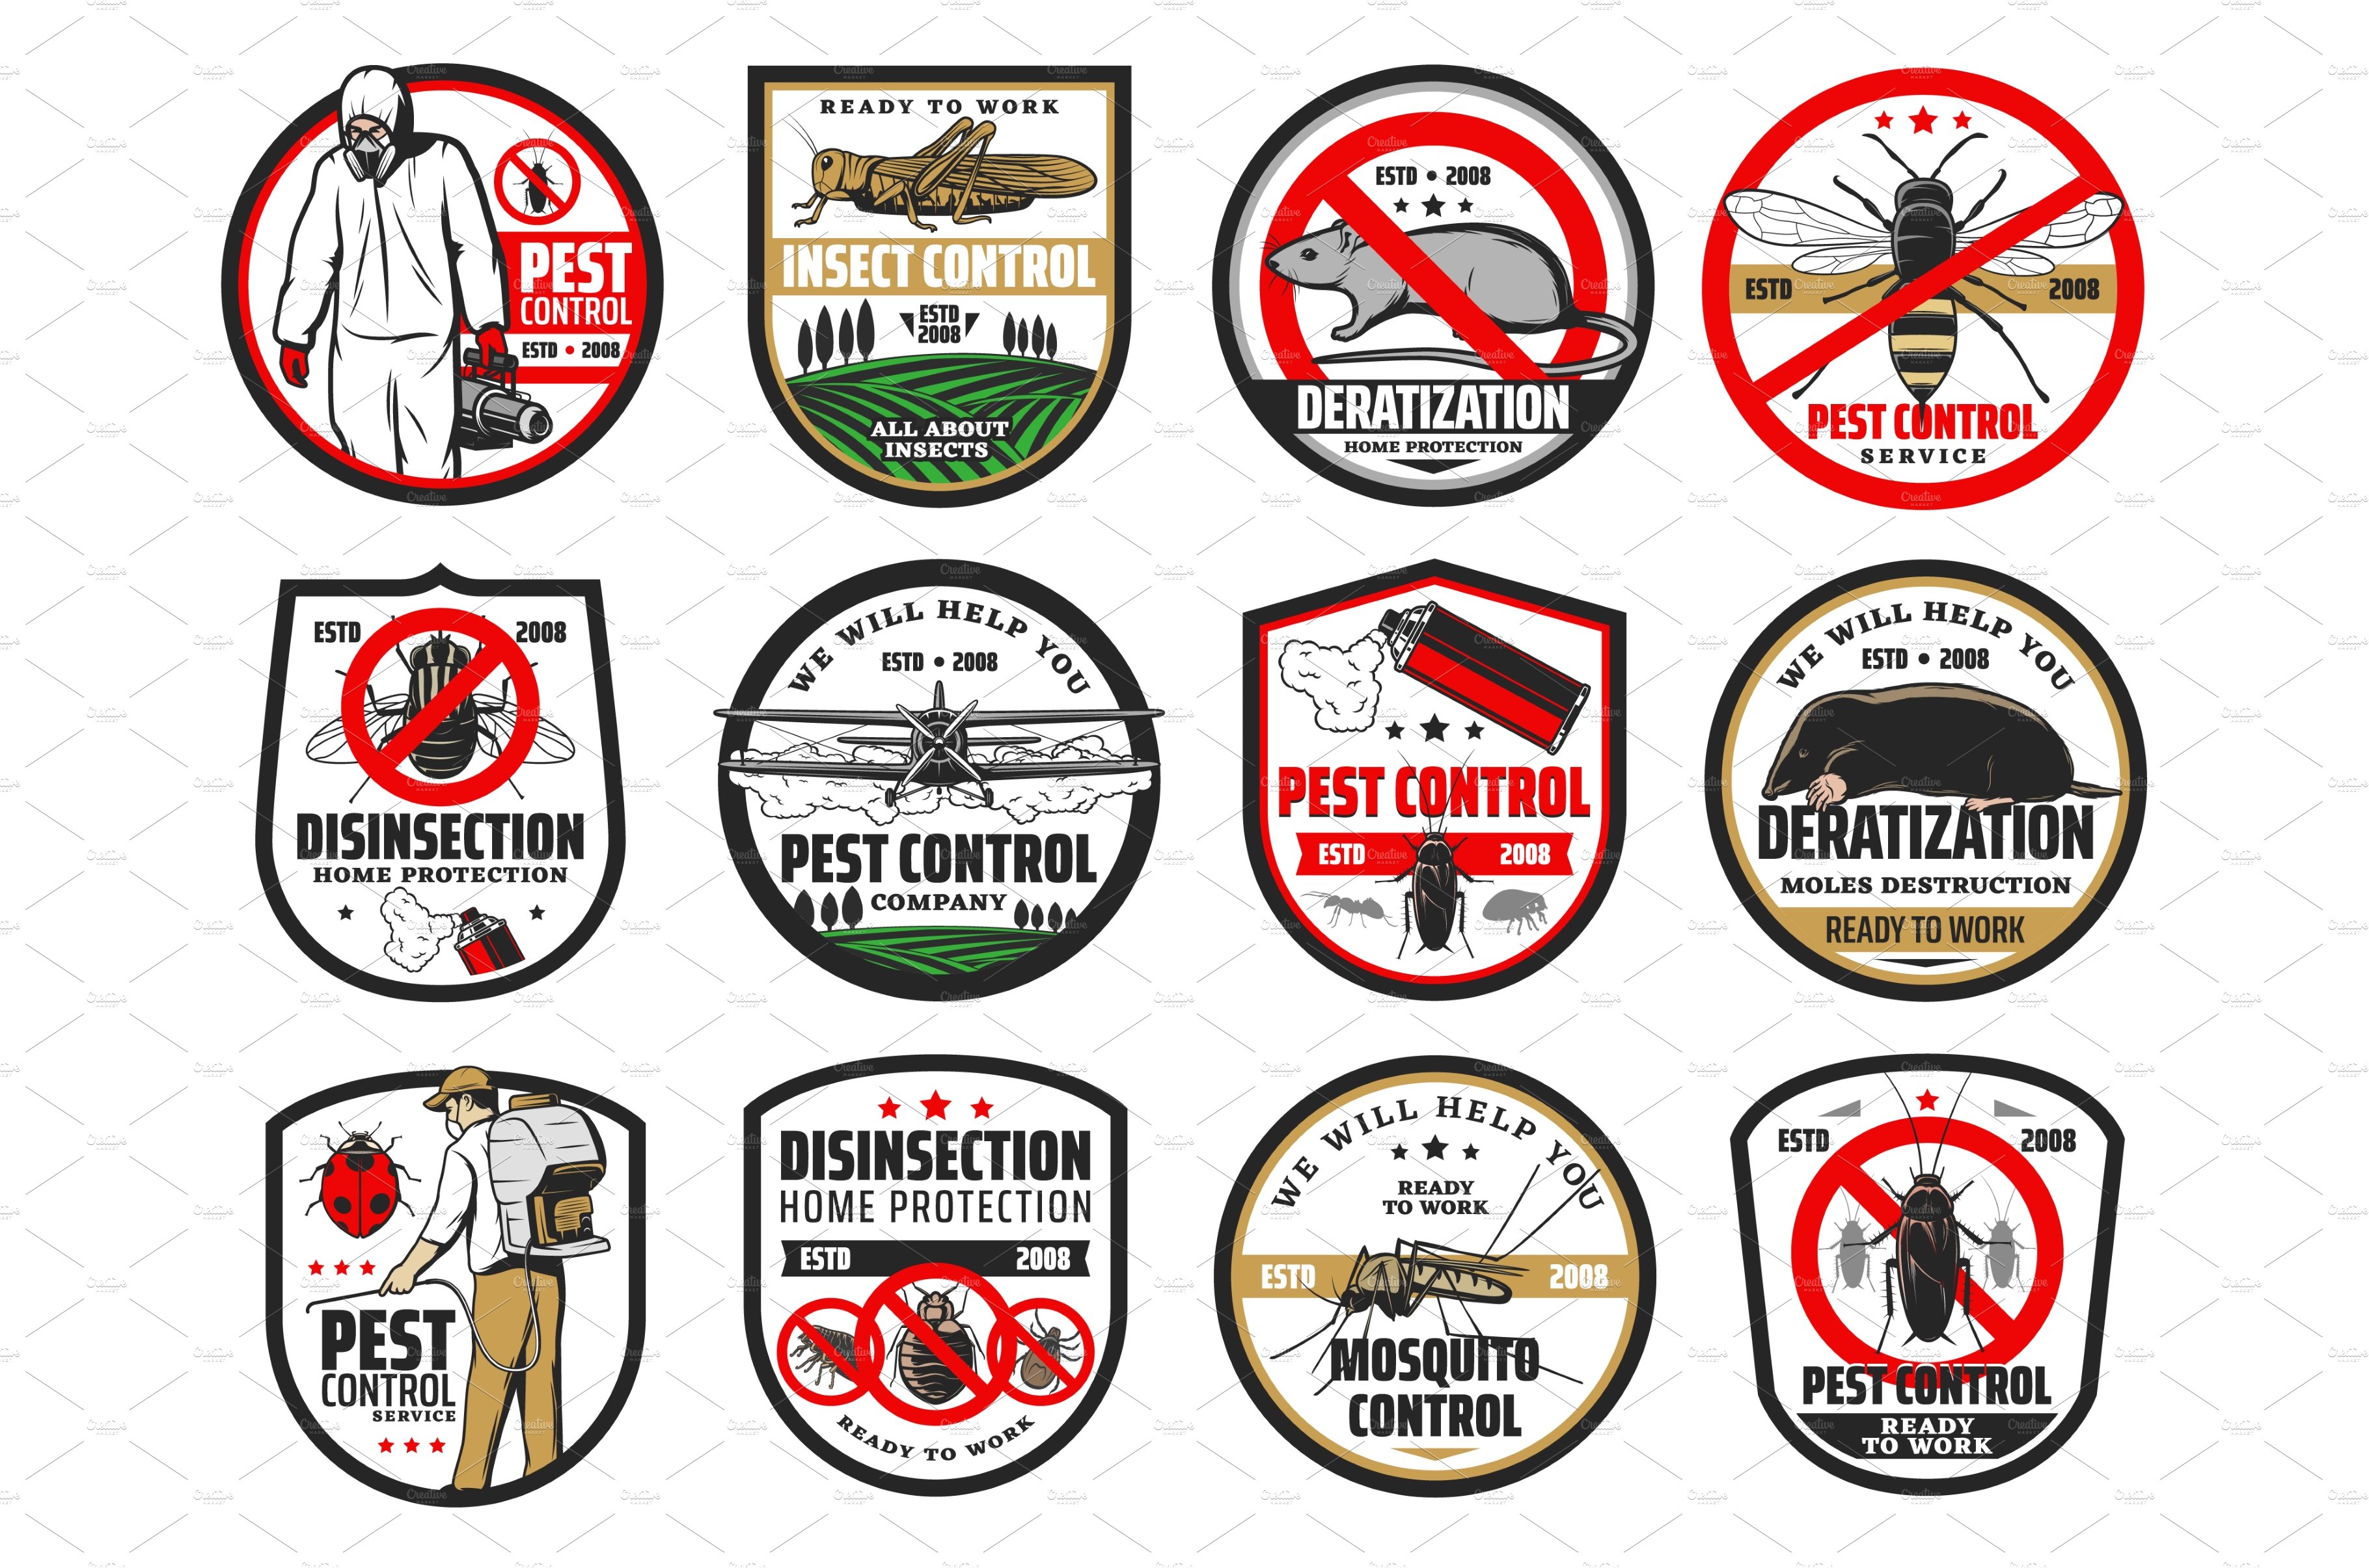 Pest control icons. Bugs and insects cover image.